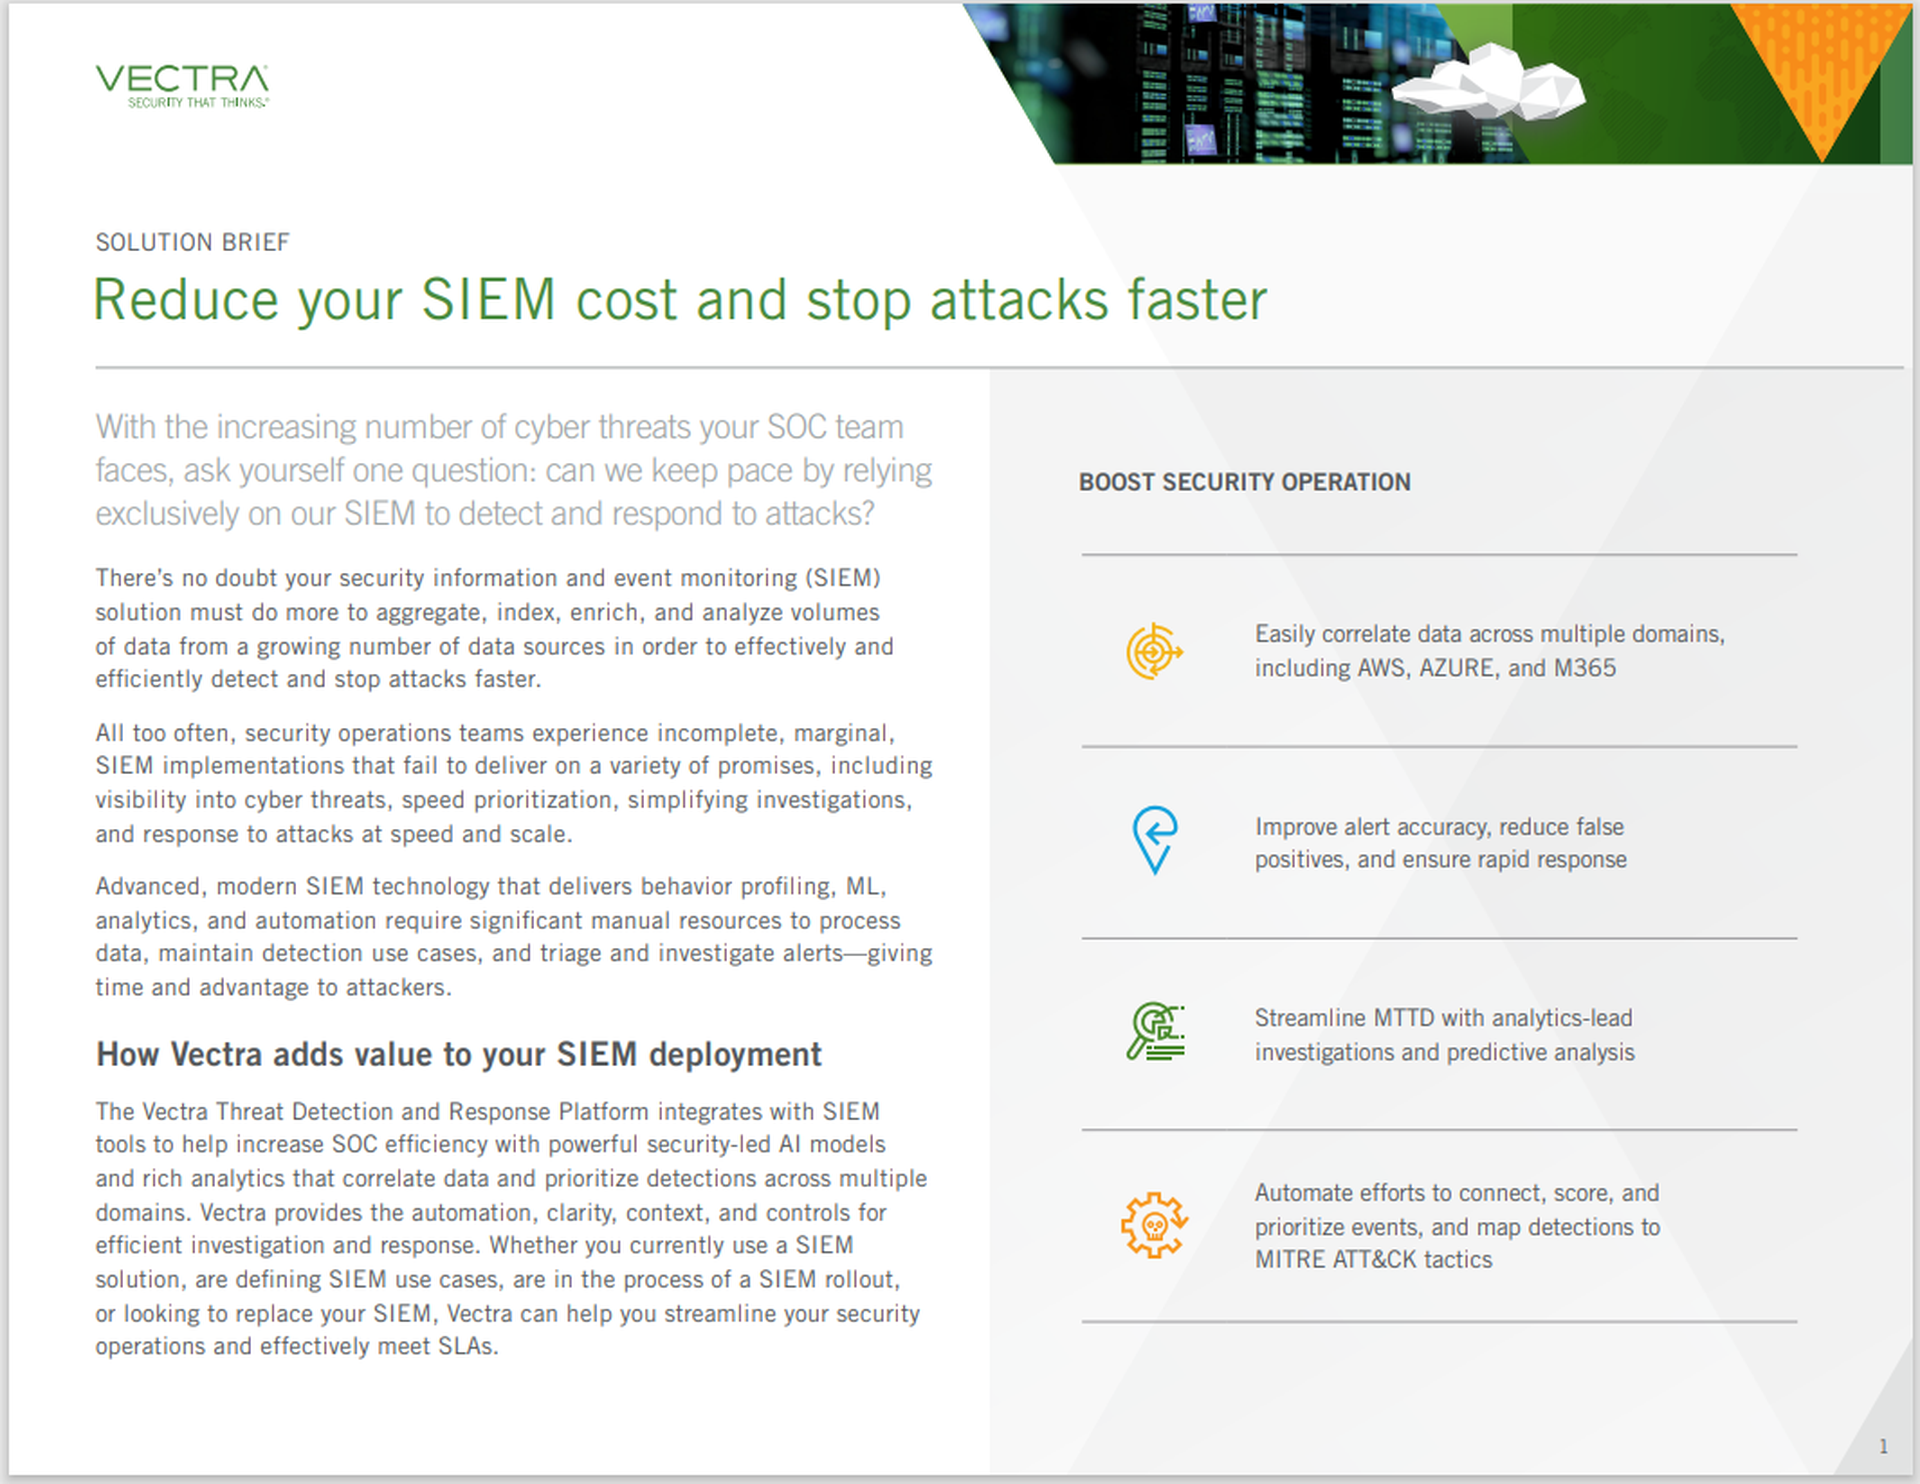 Reduce Your SIEM Cost and Stop Cyberattacks Faster